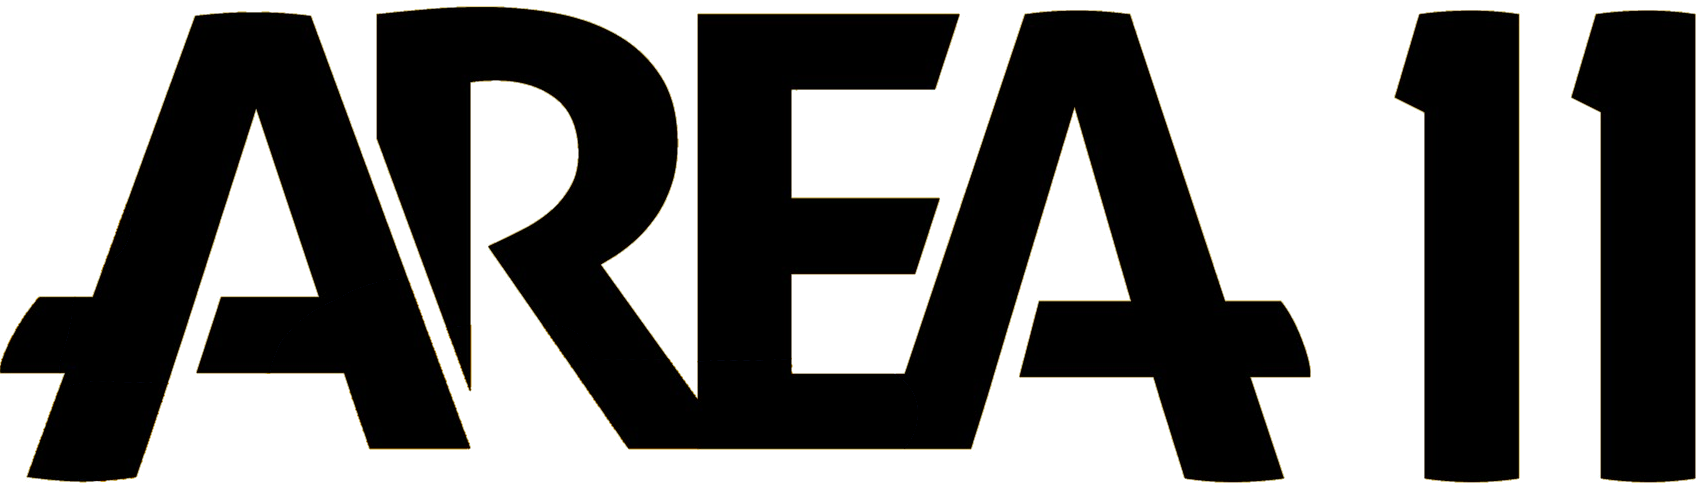 Area Logo - Area 11 Typeface Logo, Used From 2012 Presnt.png